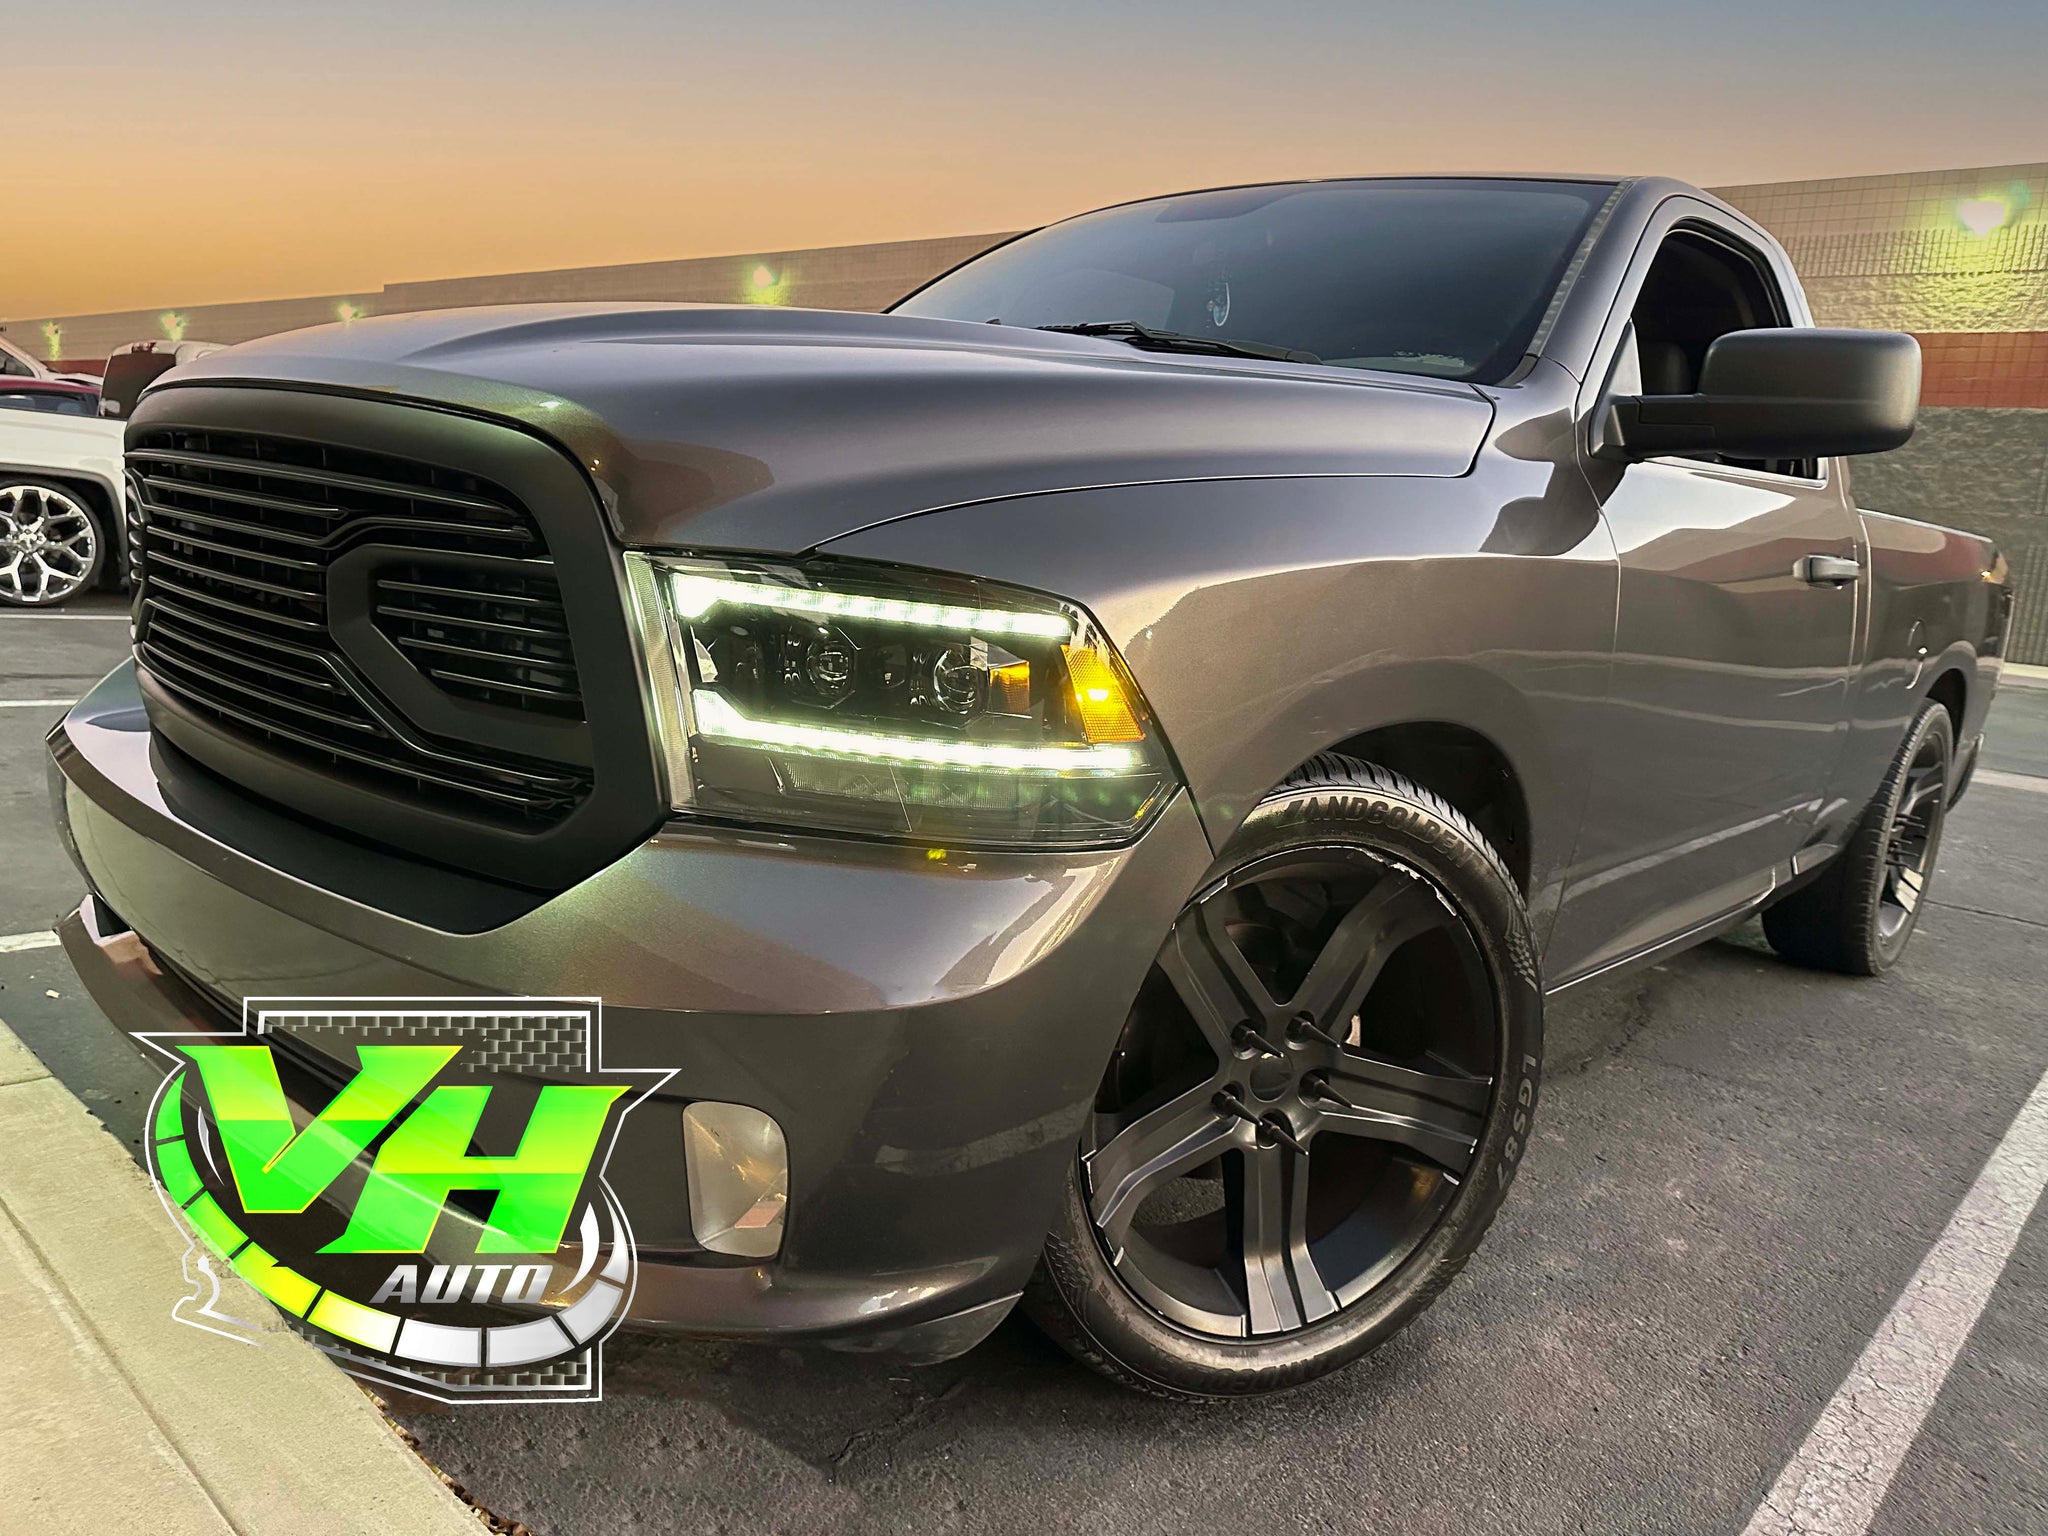 13-18 Dodge Ram 1500 “Big Horn” Style Grill – VH Auto